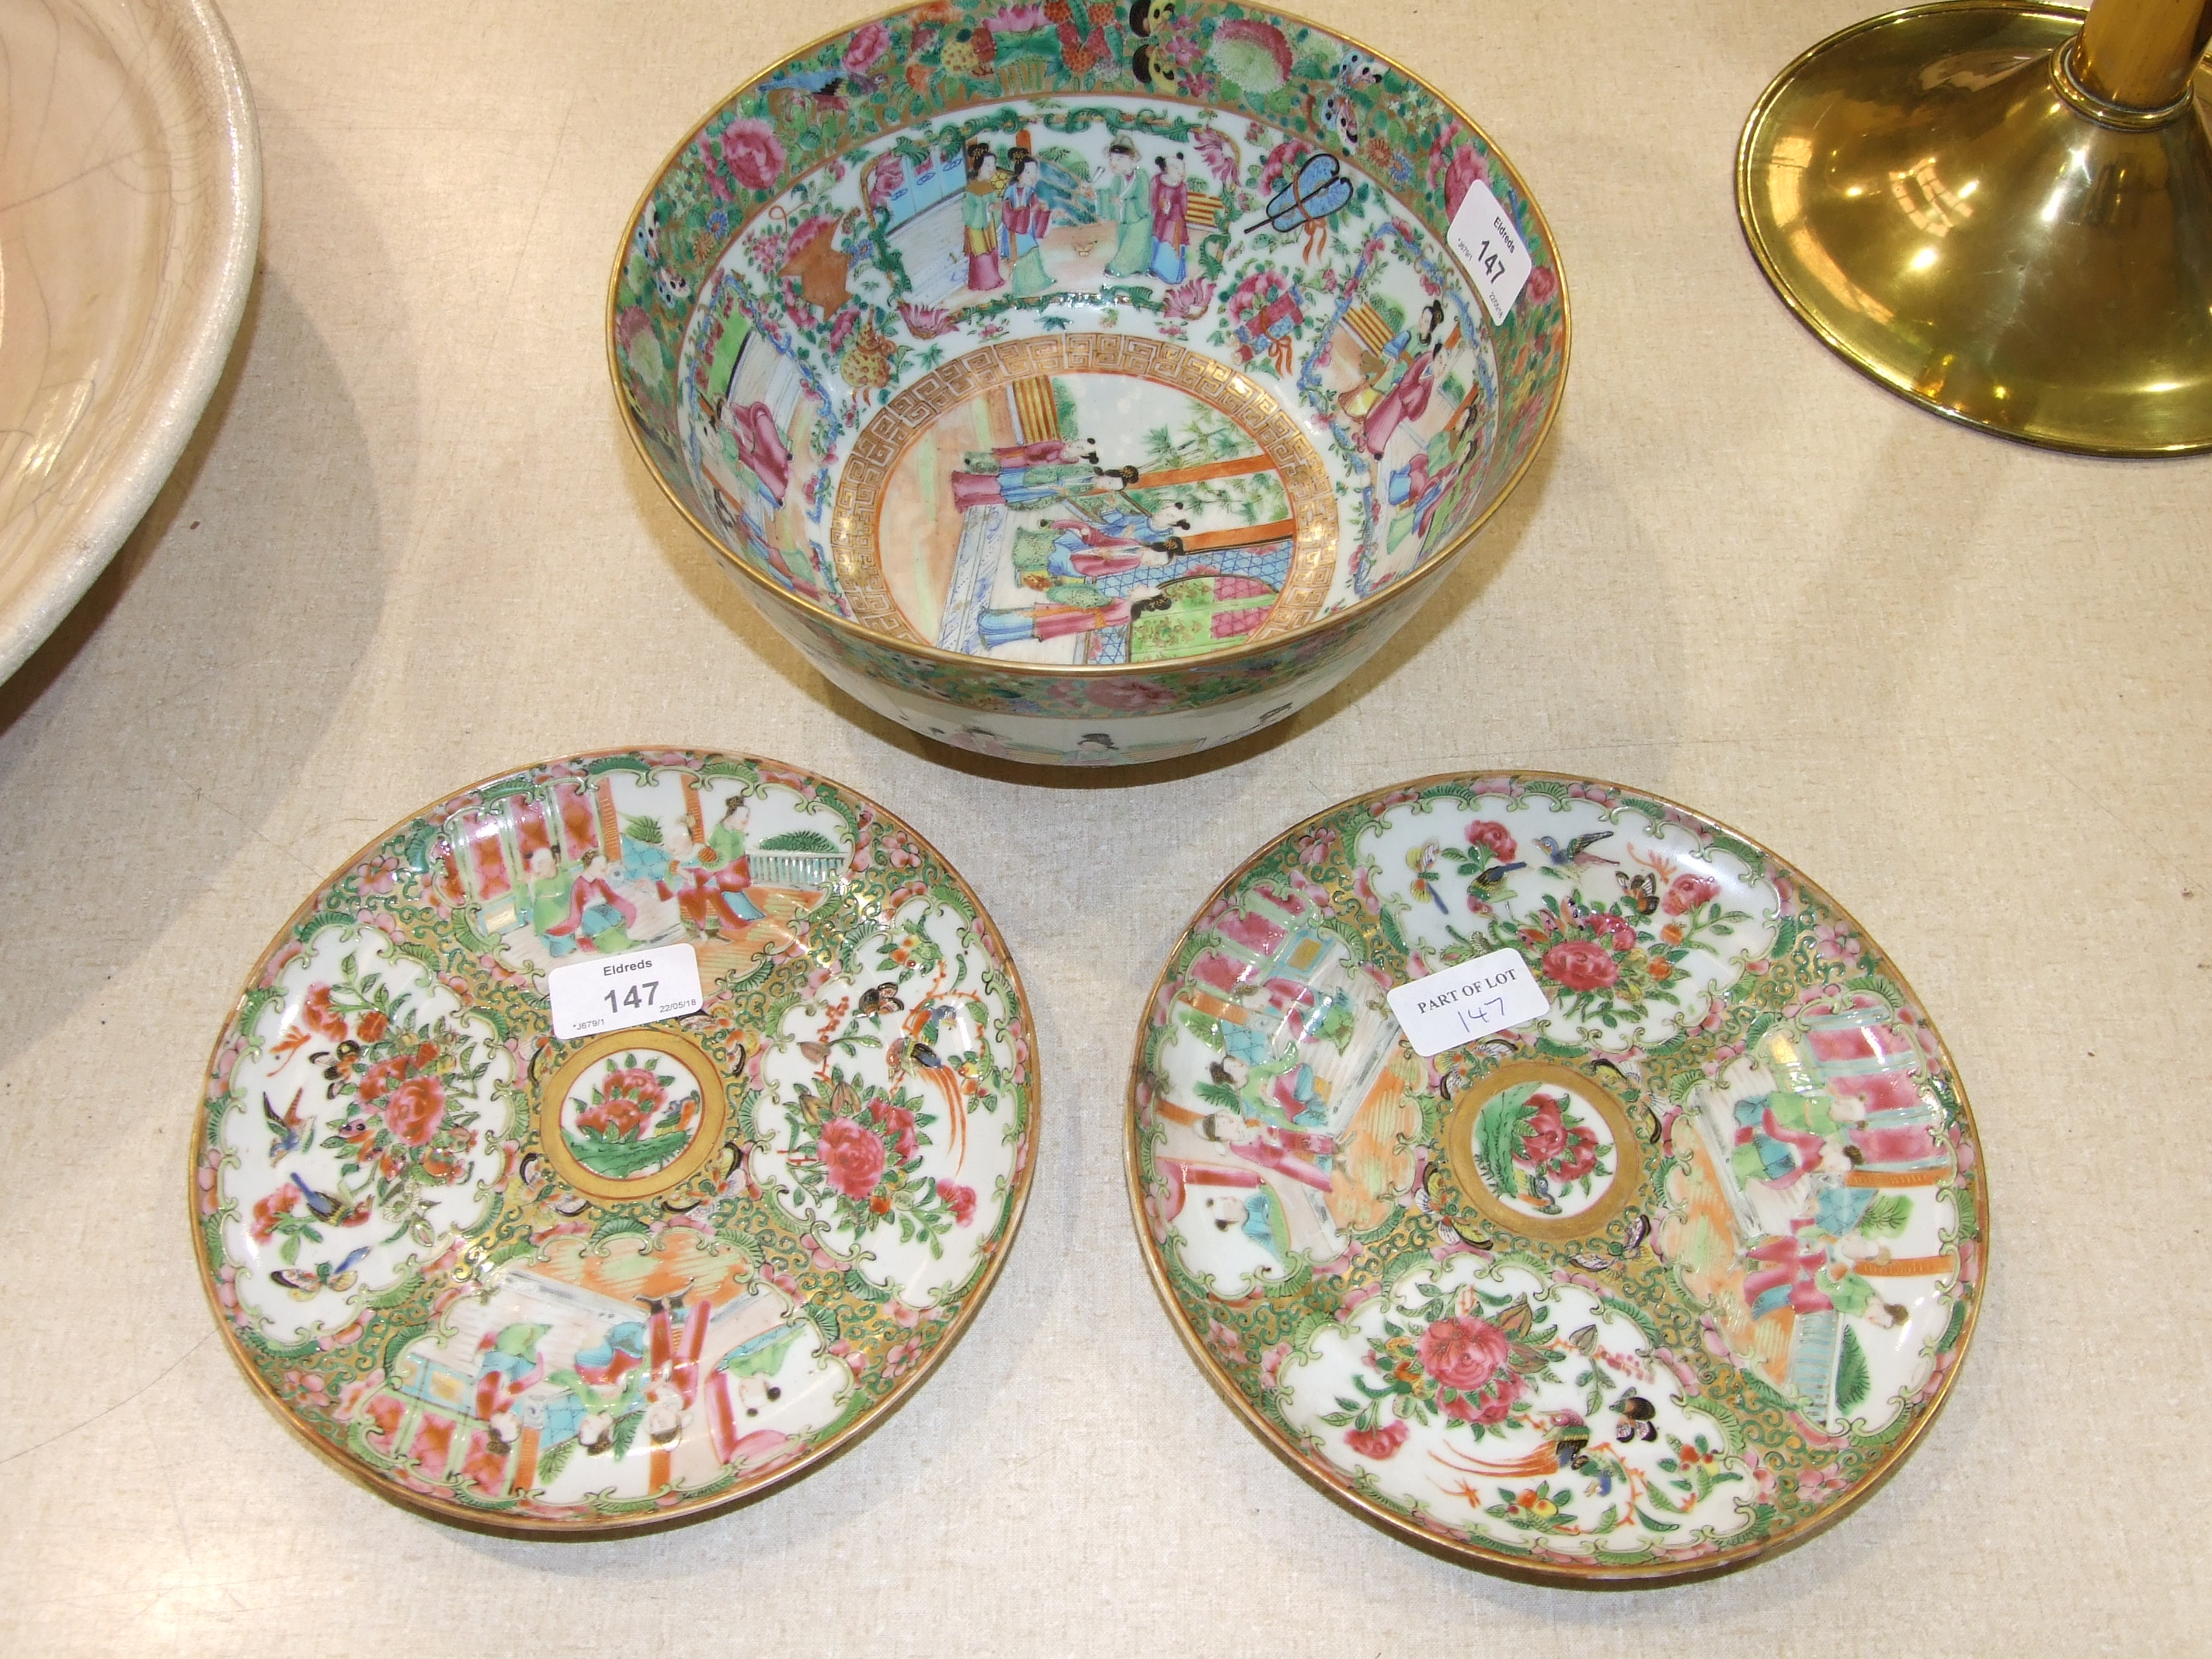 A Canton bowl, typically-decorated with panels of figures within a border of flowers, birds and